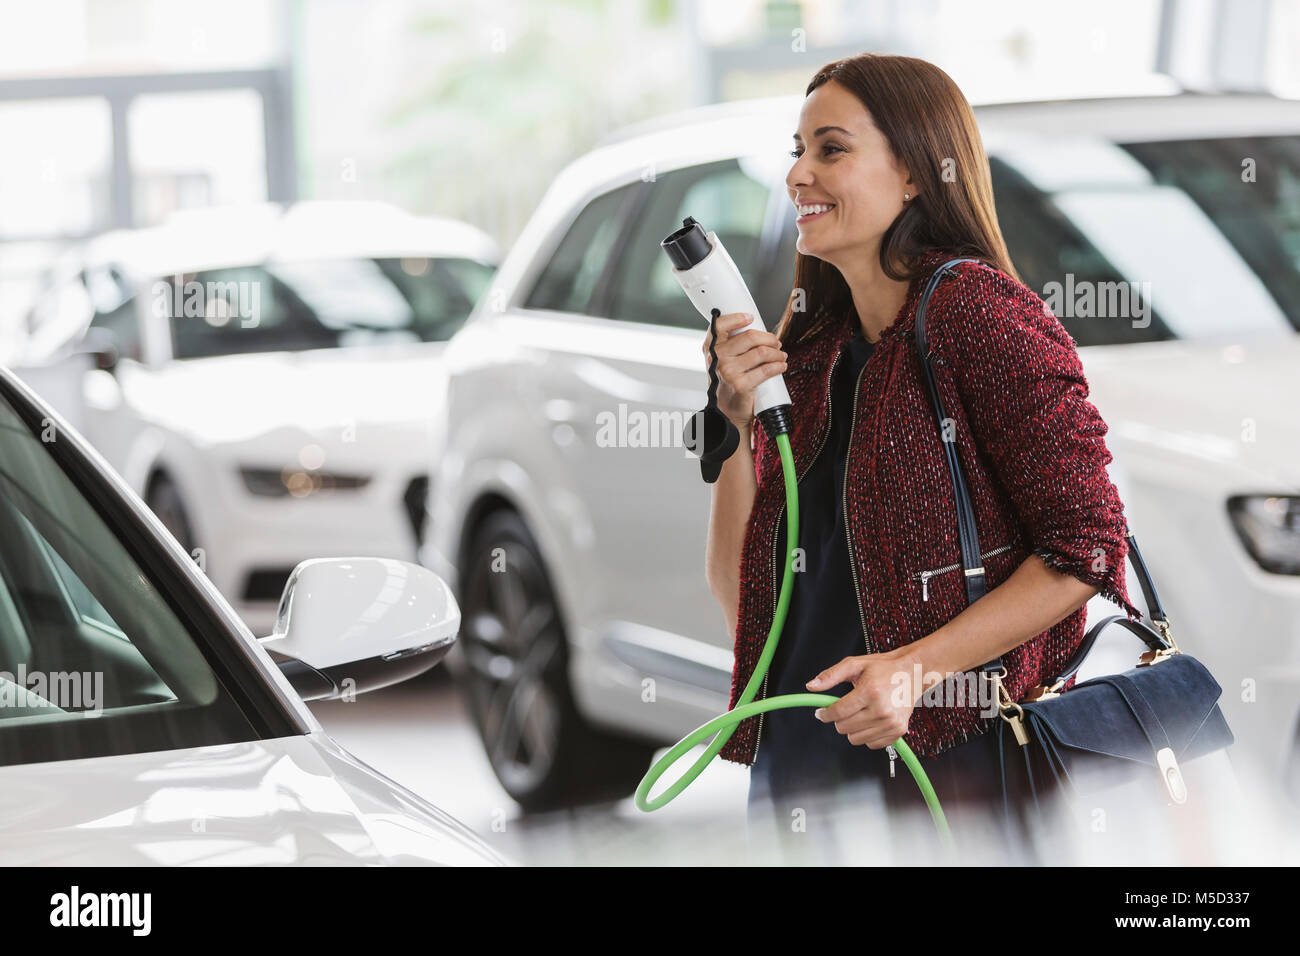 Smiling female customer carrying hybrid charging cable in car dealership showroom Stock Photo